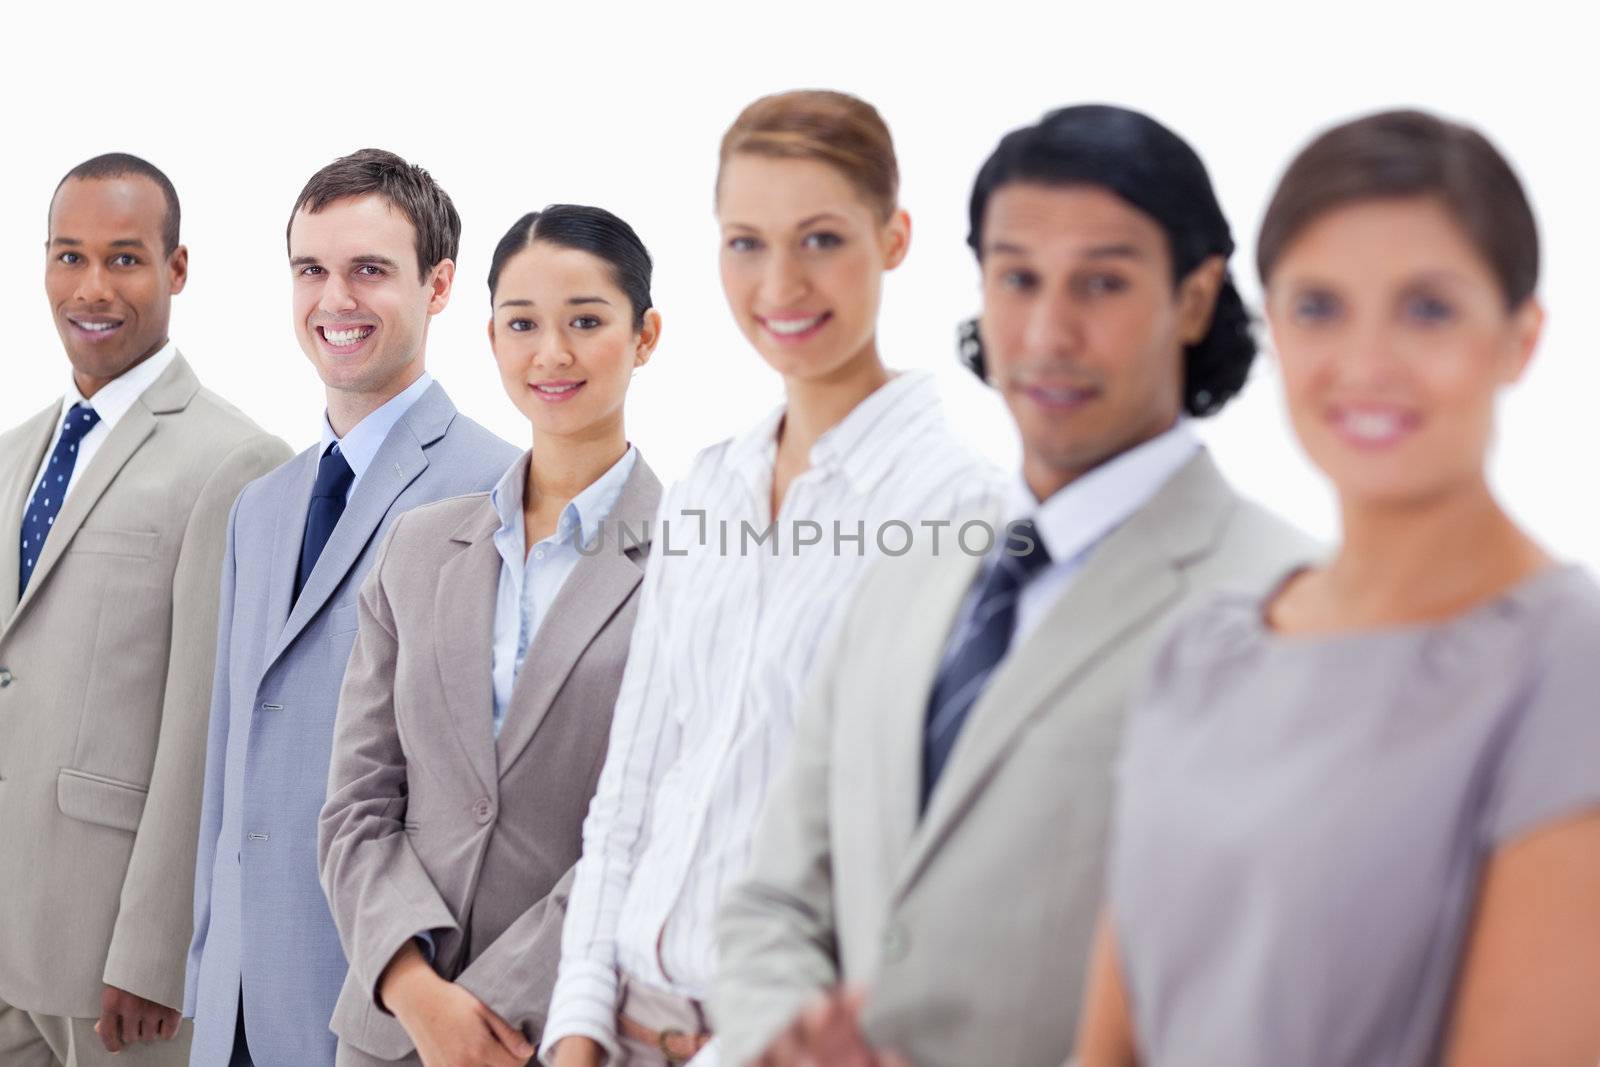 Close-up of business people smiling and looking straight with focus on the last three people